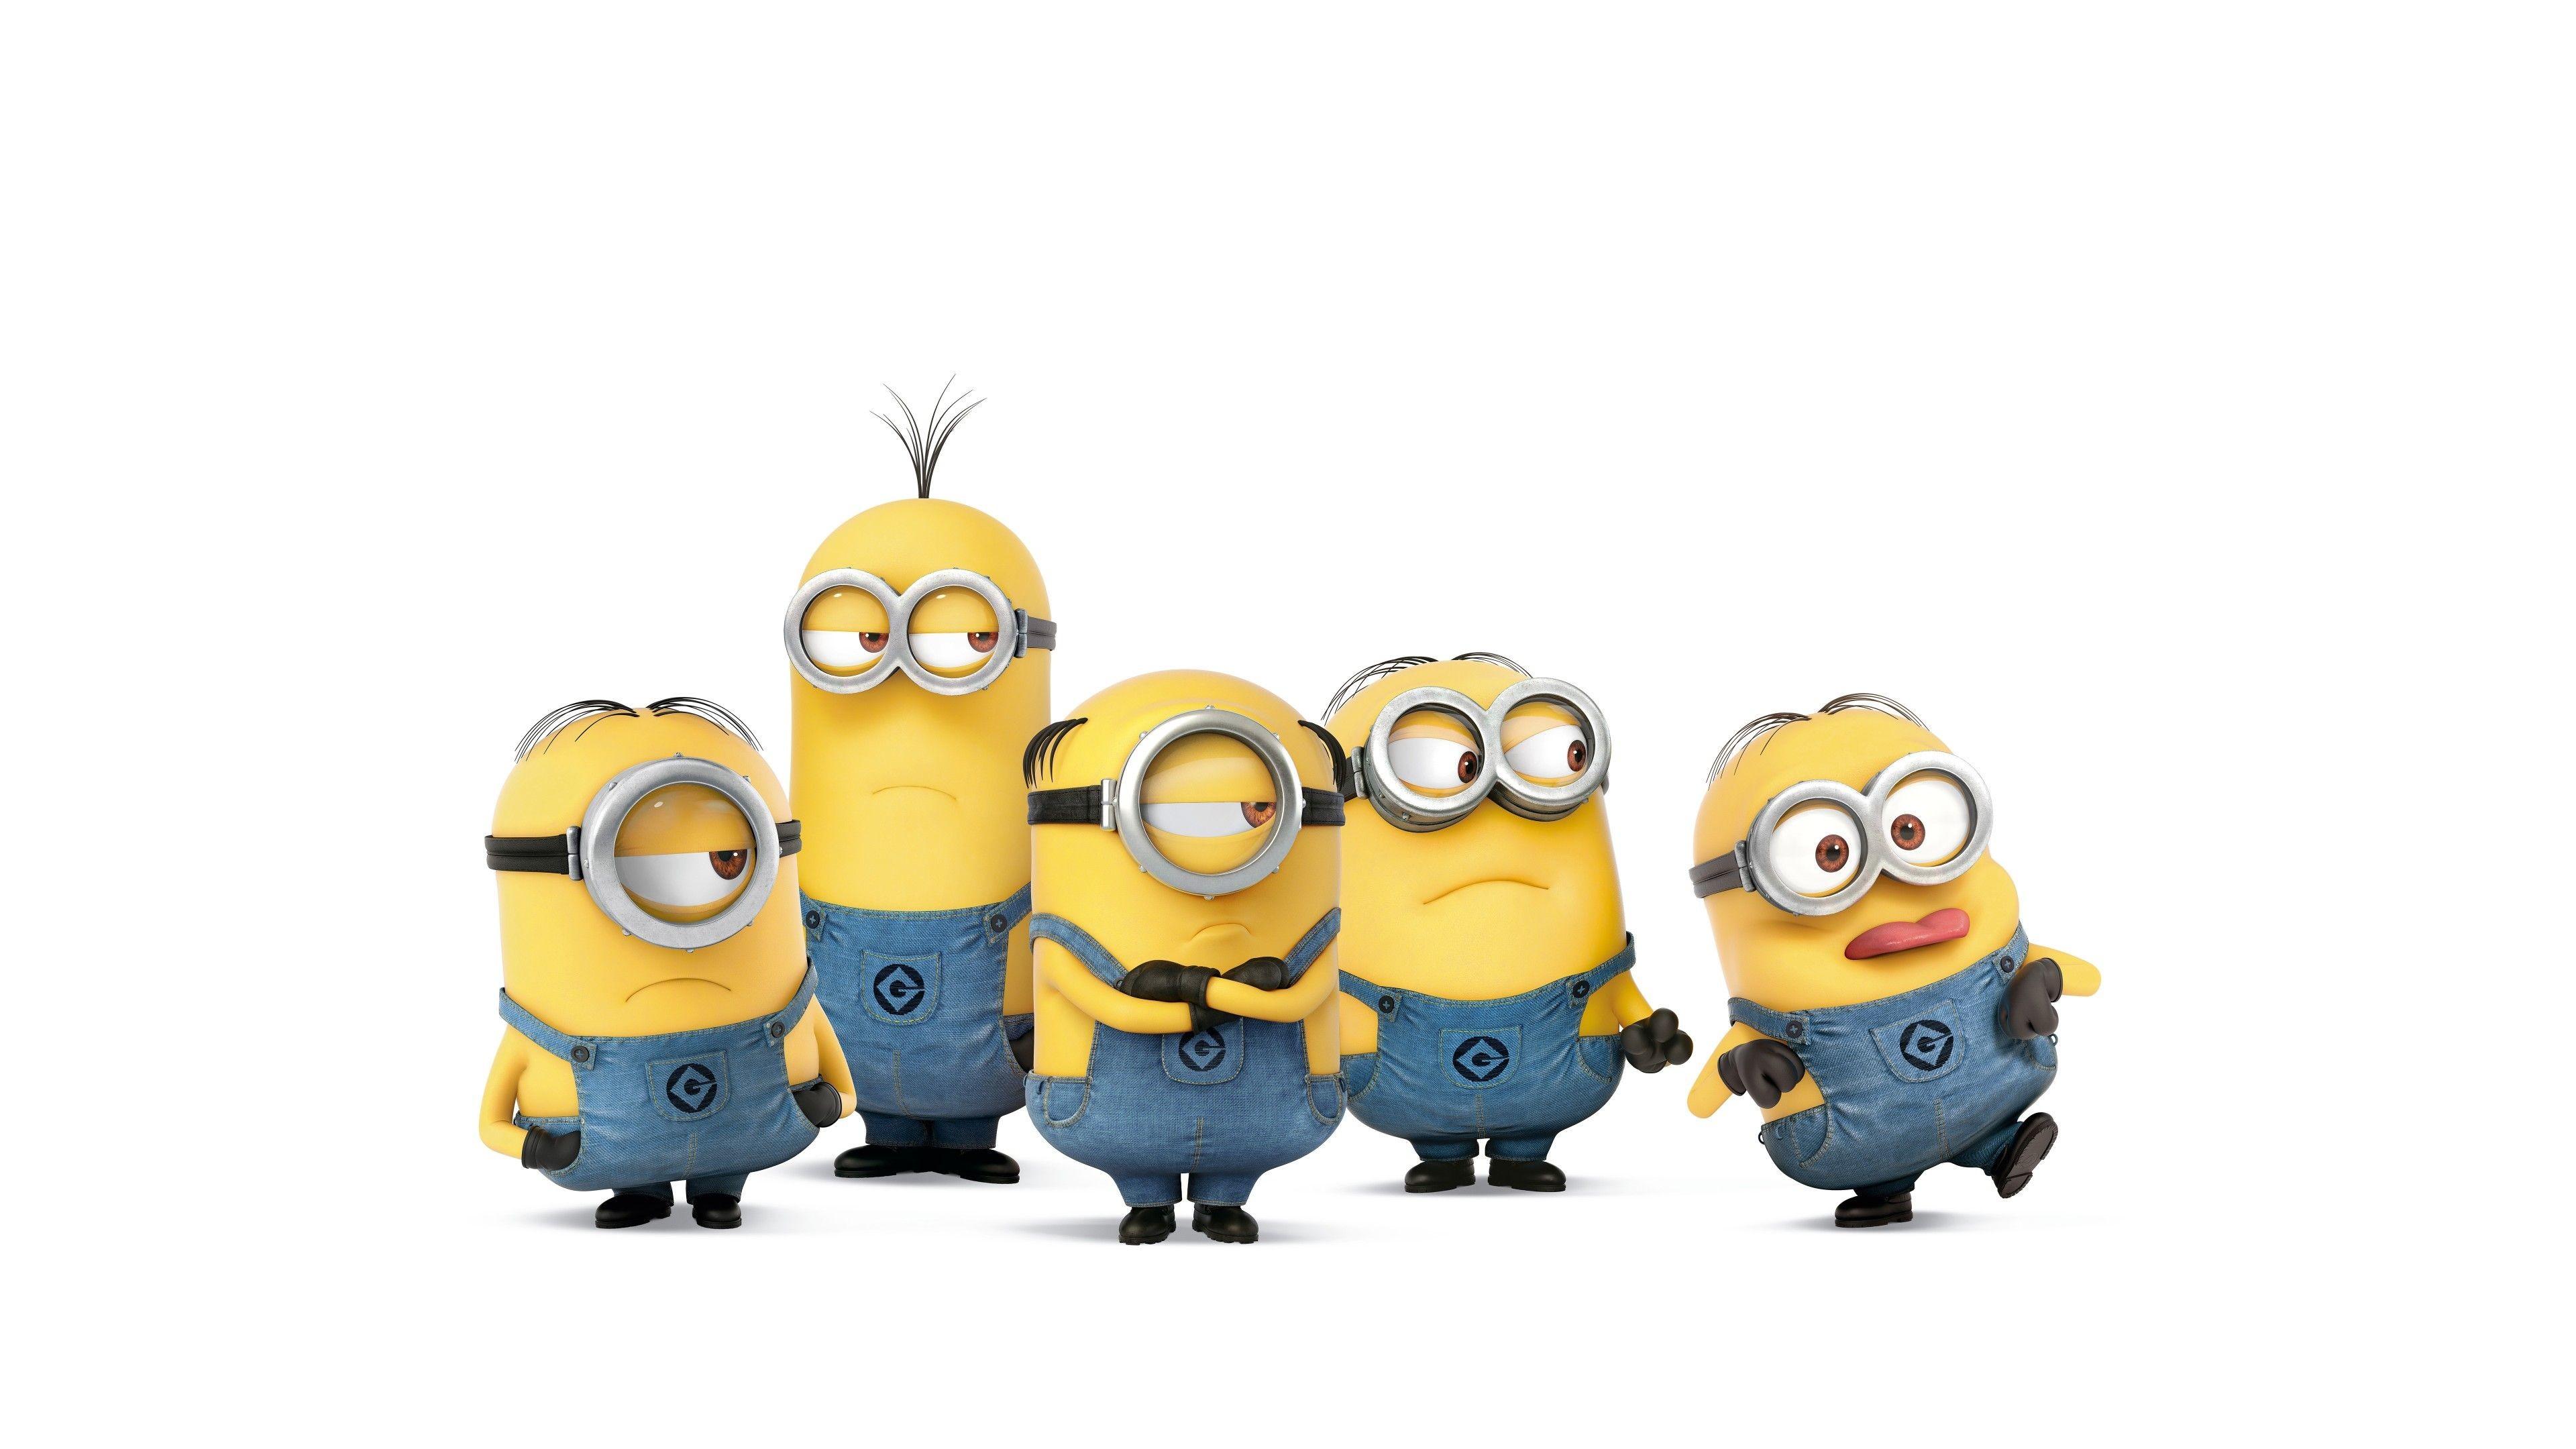 Download wallpapers Bob Despicable Me minions Bob the Minion blue stone  background Despicable Me characters Bob minion for desktop with  resolution 2880x1800 High Quality HD pictures wallpapers